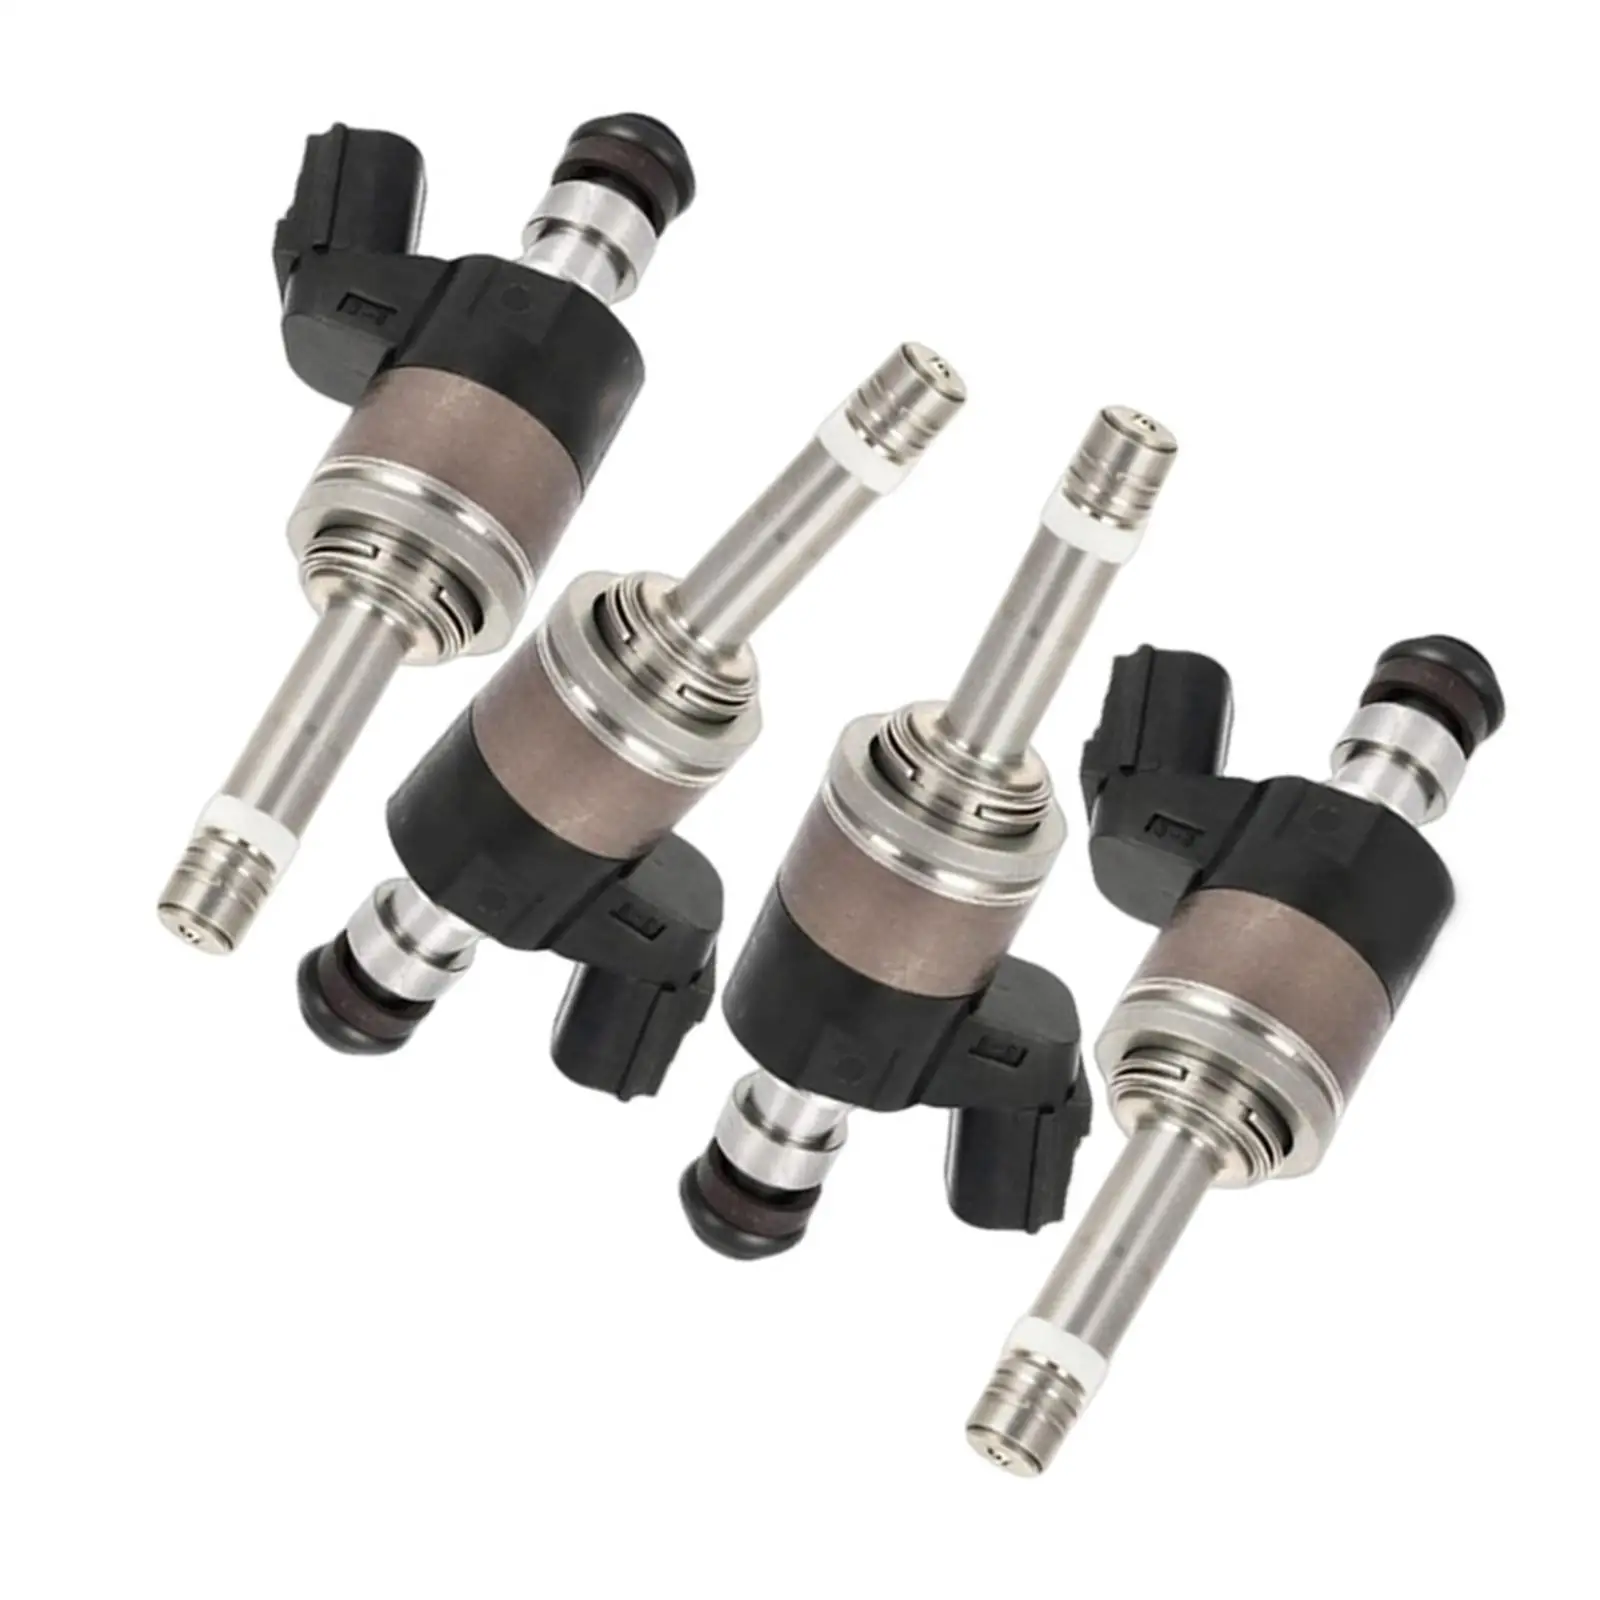 4Pcs Car Fuel Injector Stable Performance Replacement for Honda Fit 1.5L L4 2015-2020 Durable Easy Installation Accessories